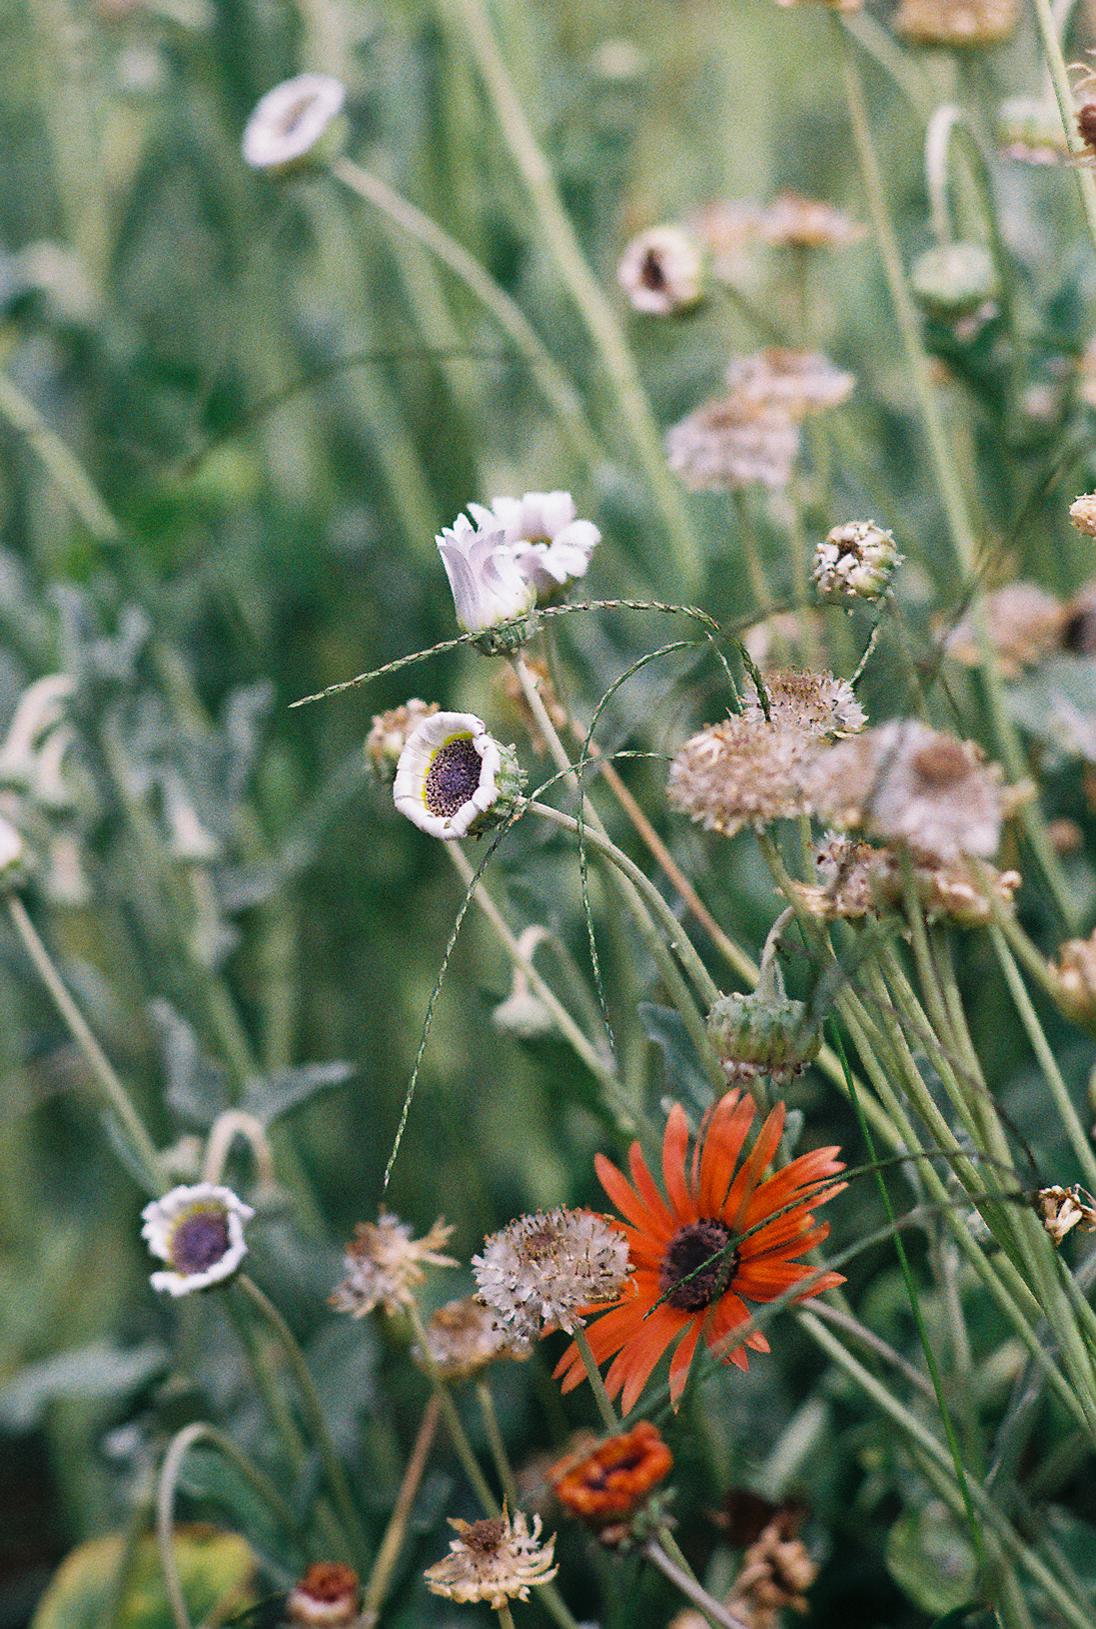 Mixed flowers and grass